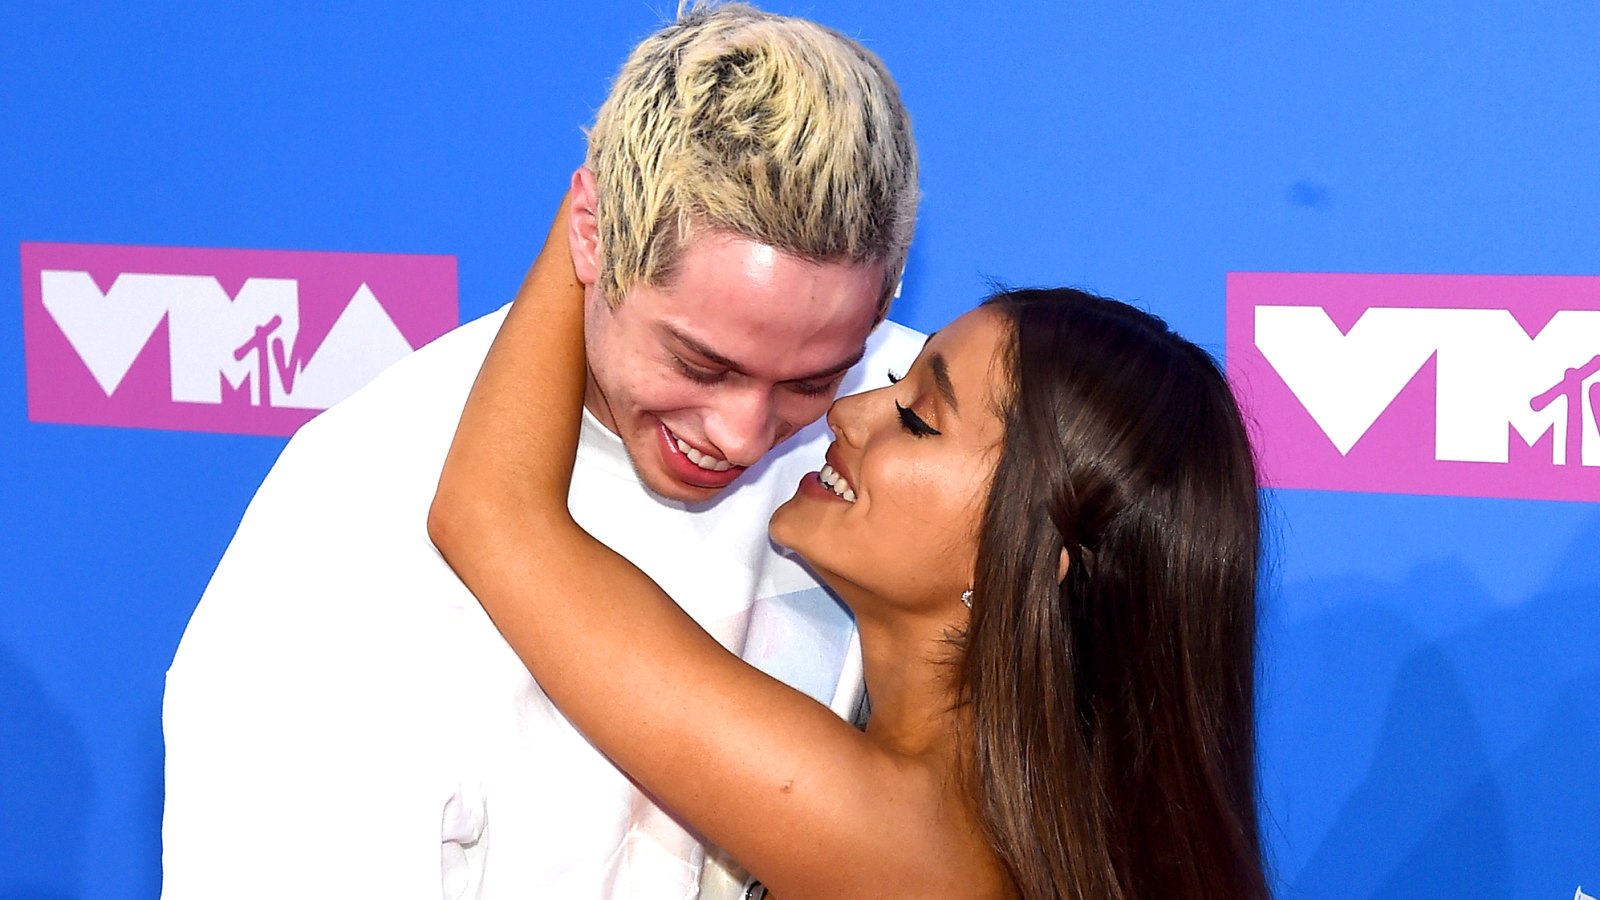 Pete Davidson Faces Backlash, Fans Accuse Him of Objectifying Ariana Grande